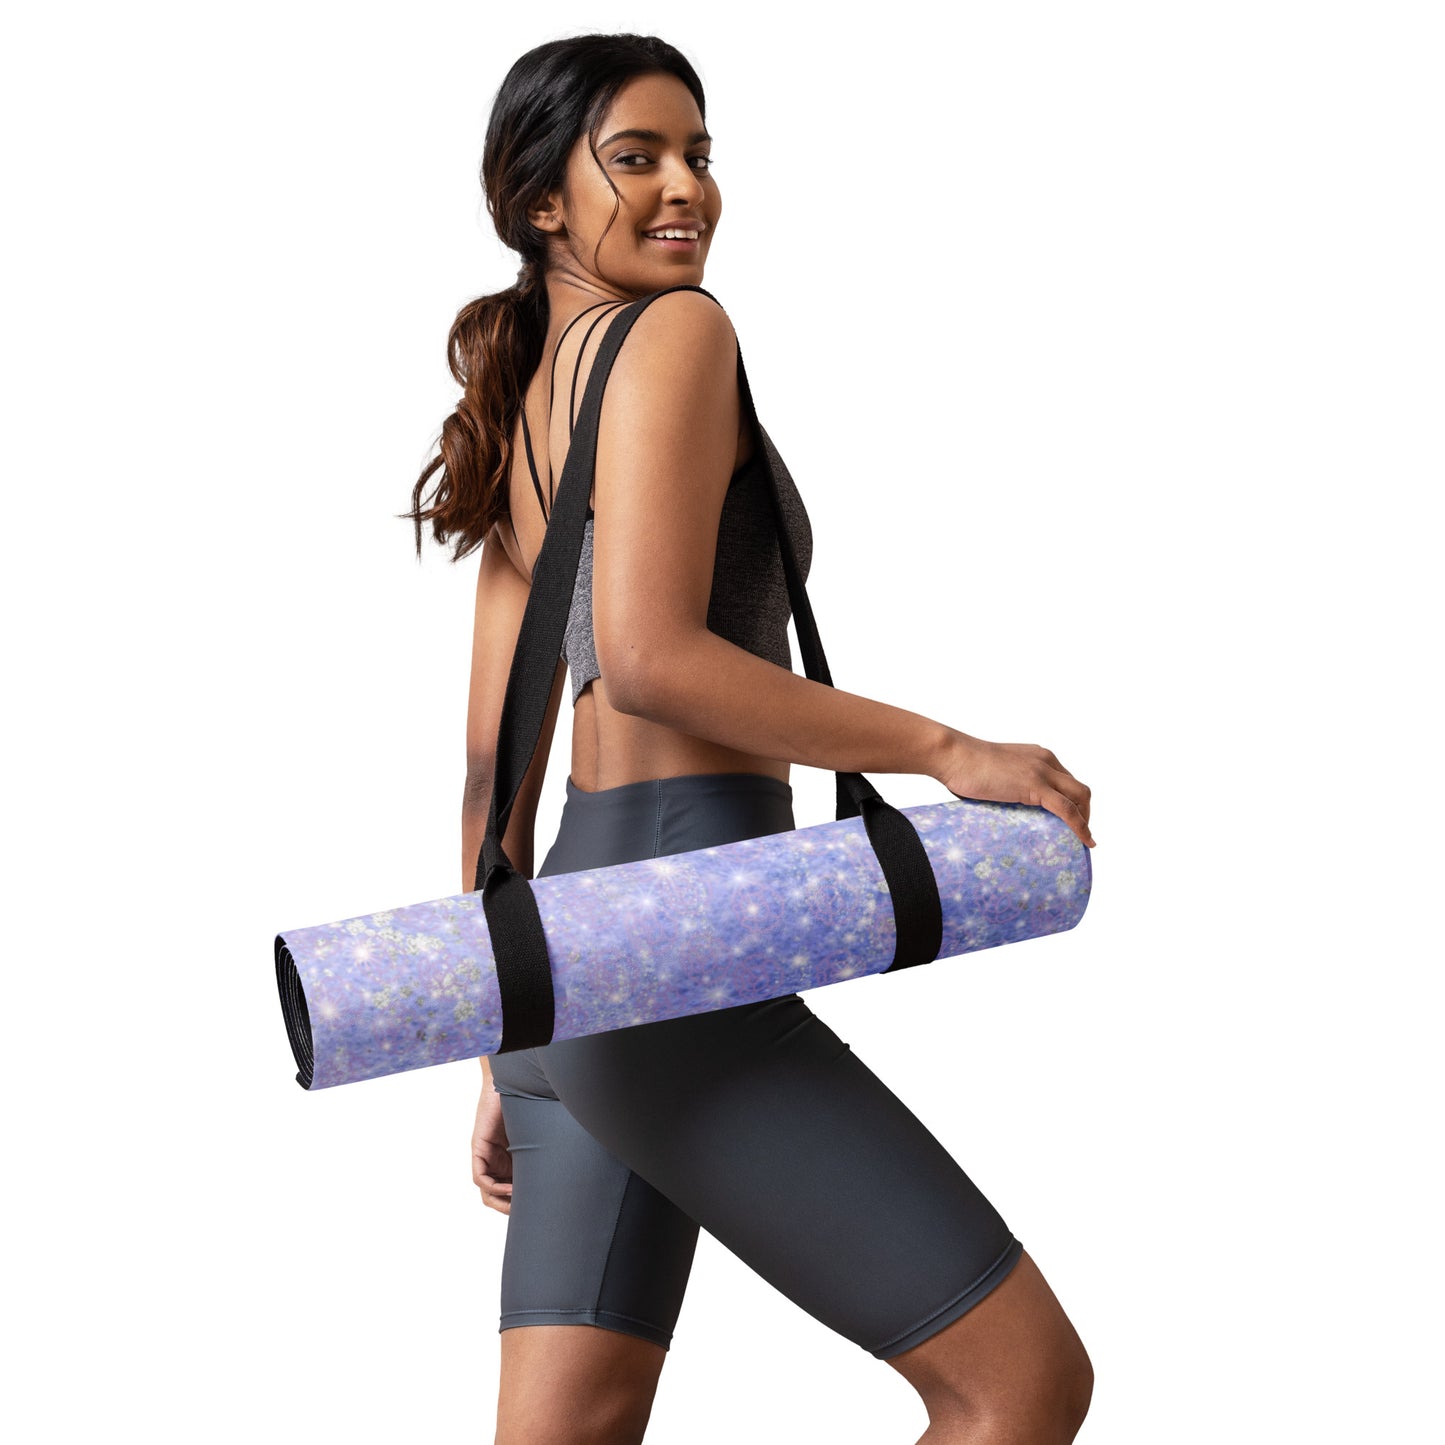 Yoga mat- Anti-slip rubber bottom- soft micro suede top easy to carry, Lavender Orbit Collection